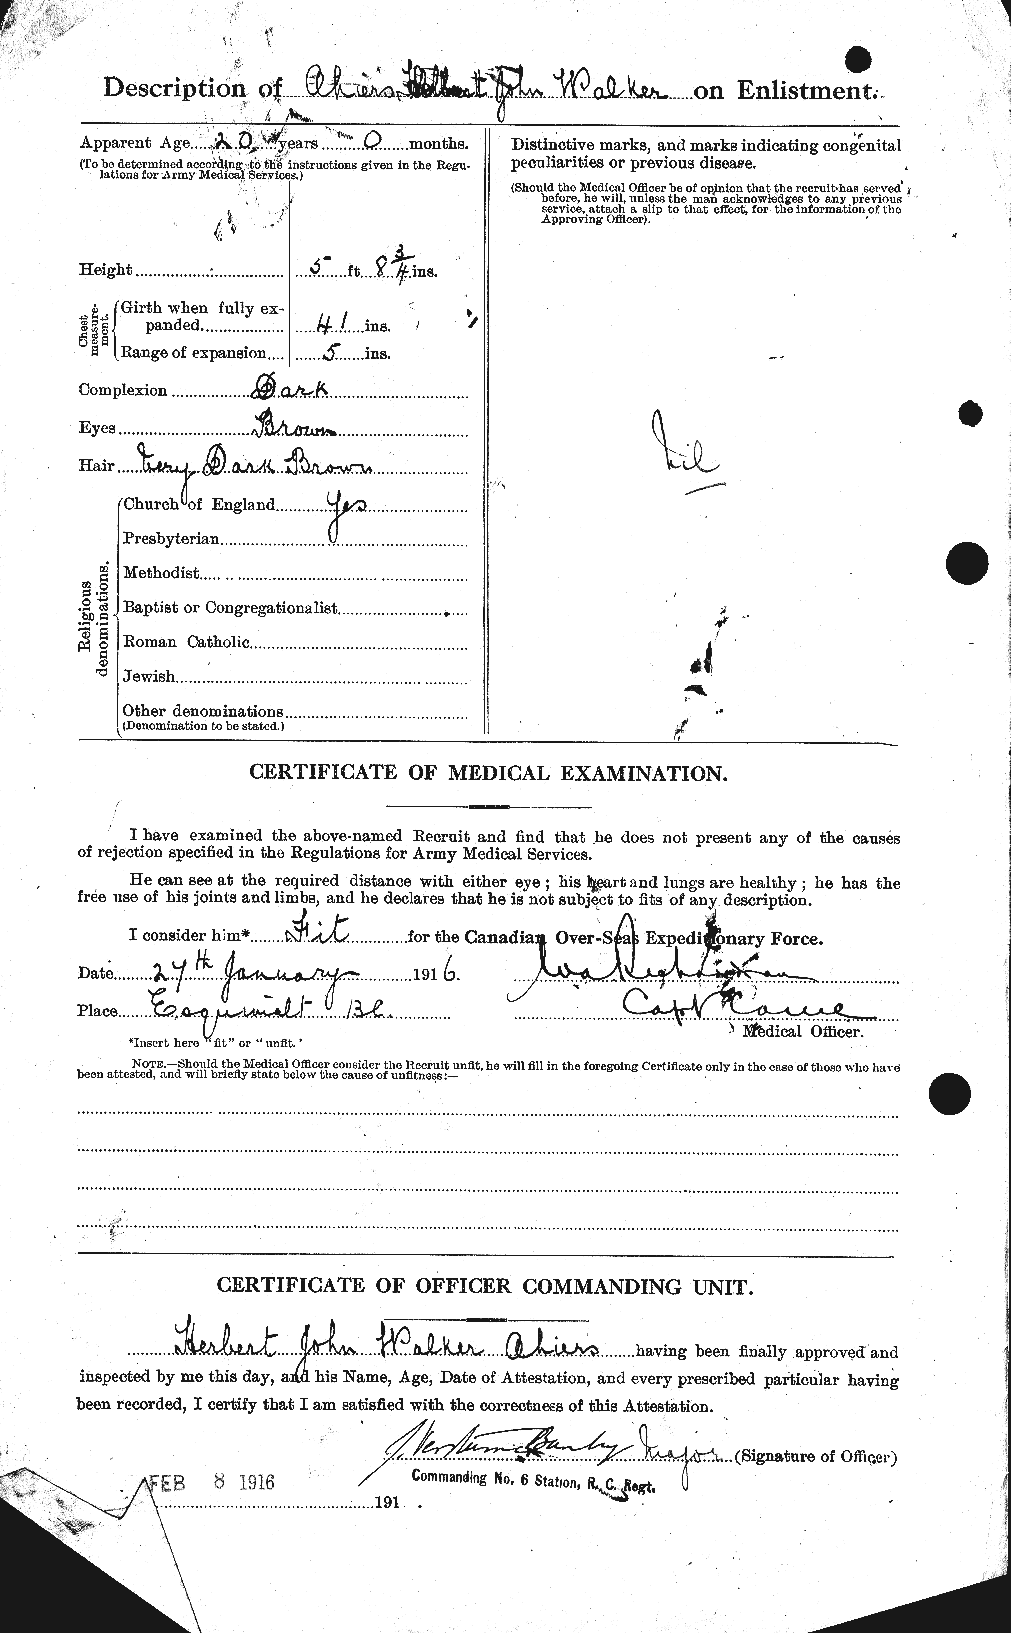 Personnel Records of the First World War - CEF 203896b